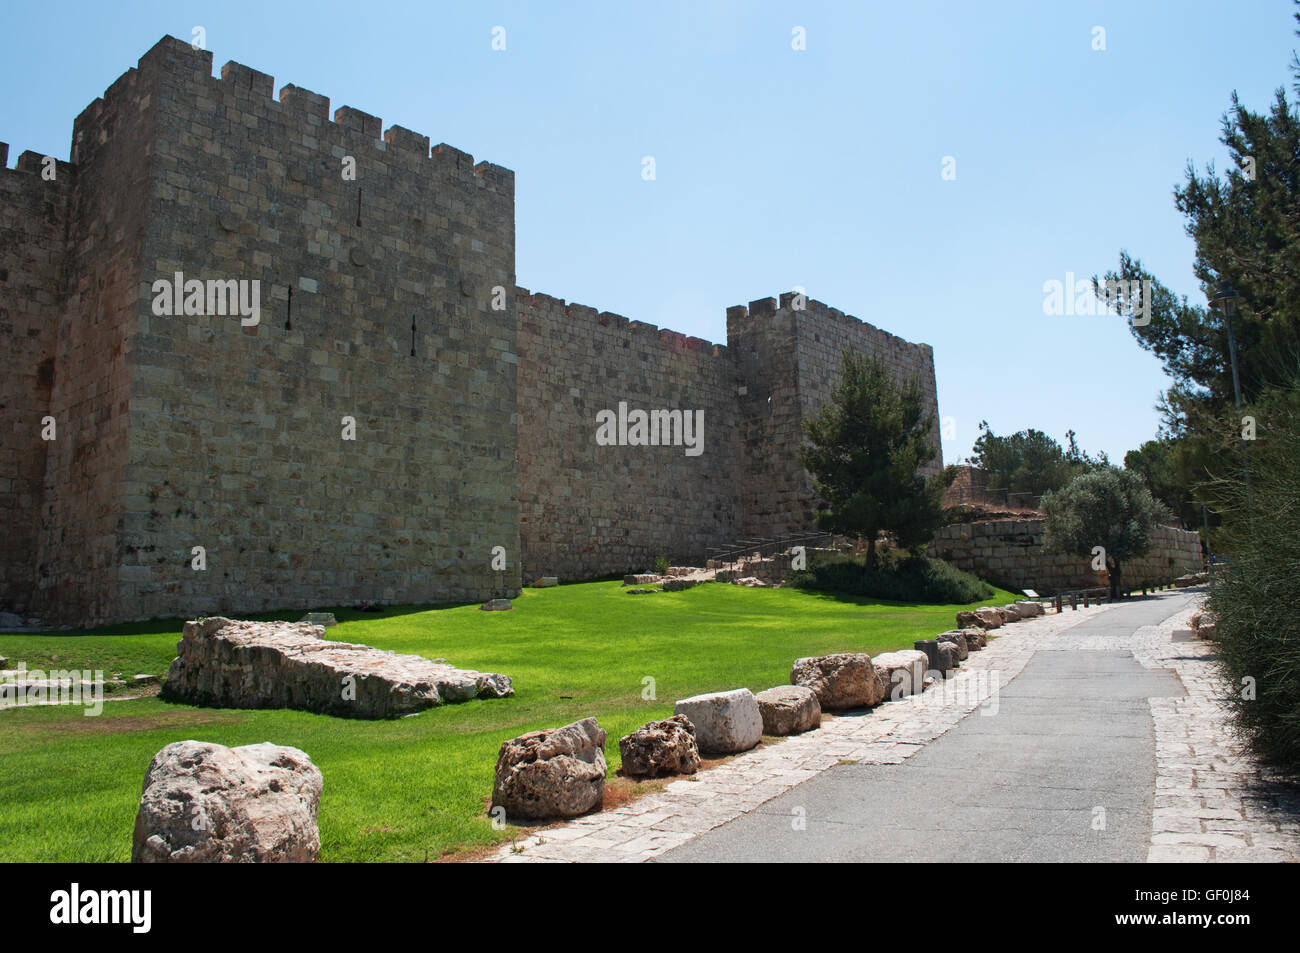 Jerusalem: the walking tour on the ancient walls surrounding the Old City, built under Suleiman the Magnificent between 1537 and 1541 Stock Photo